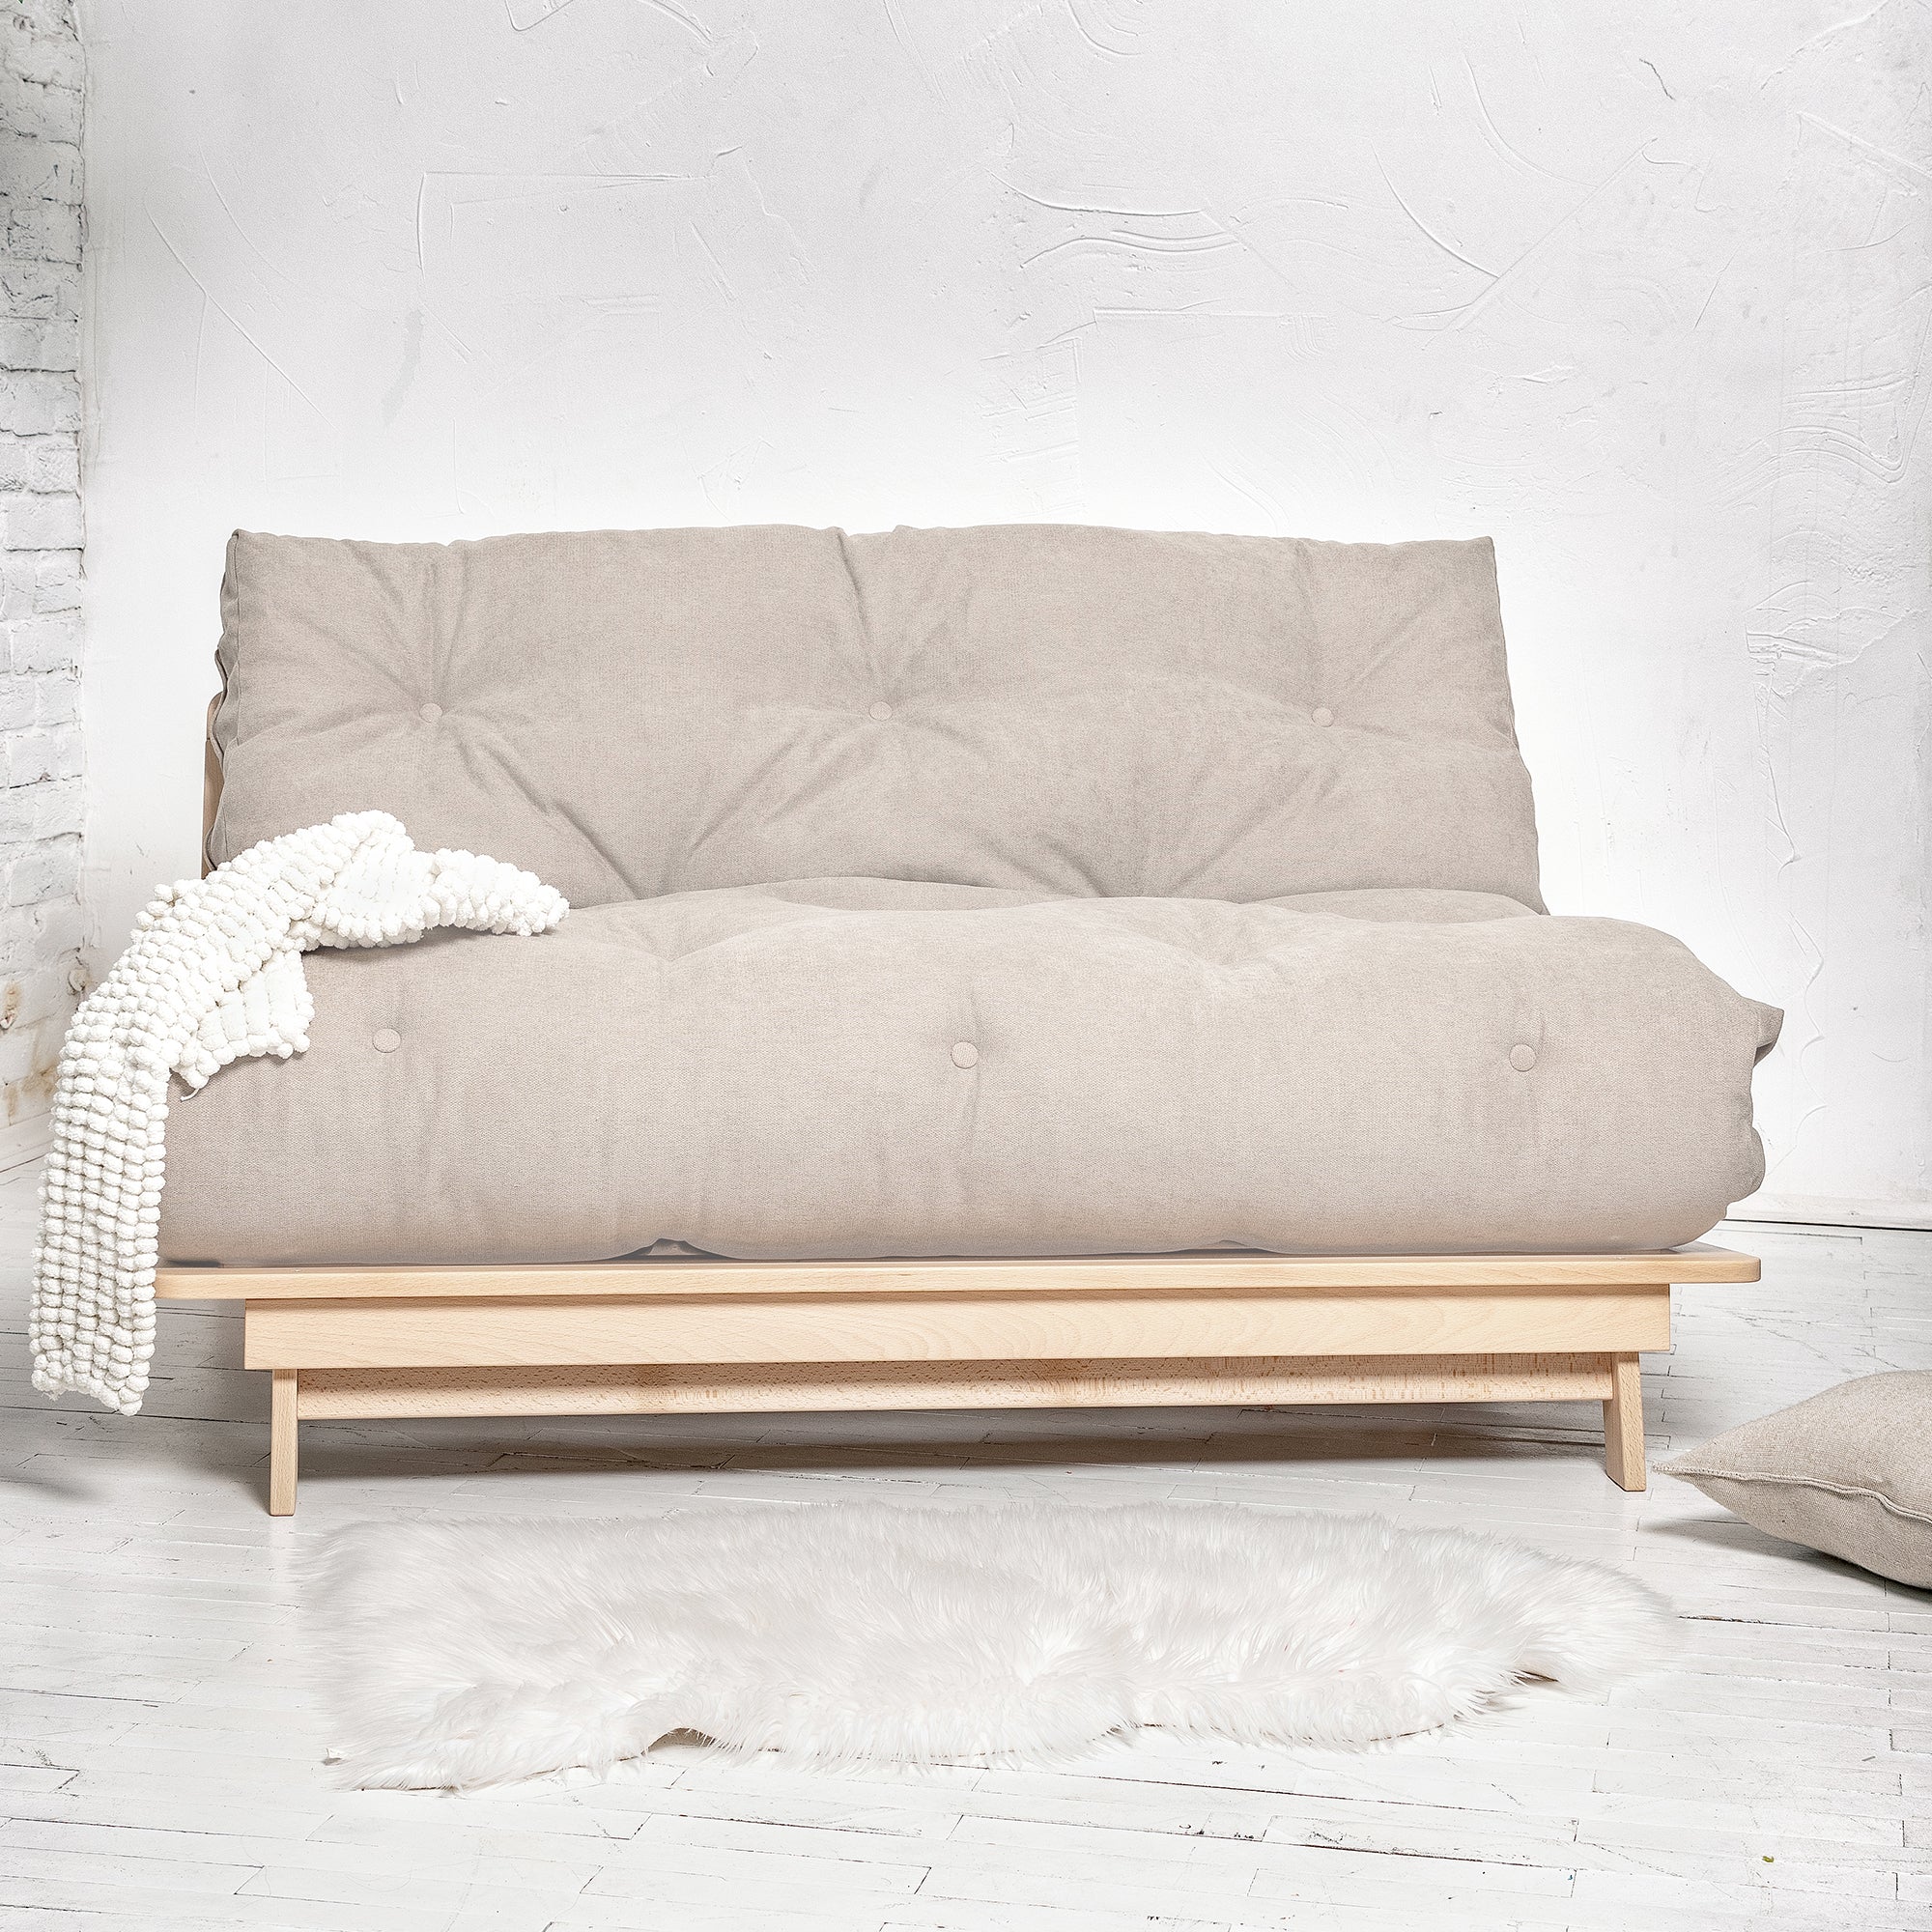 LAYTI-140 Futon Chair, Beech Wood, Natural Colour-beige fabric-interior front view